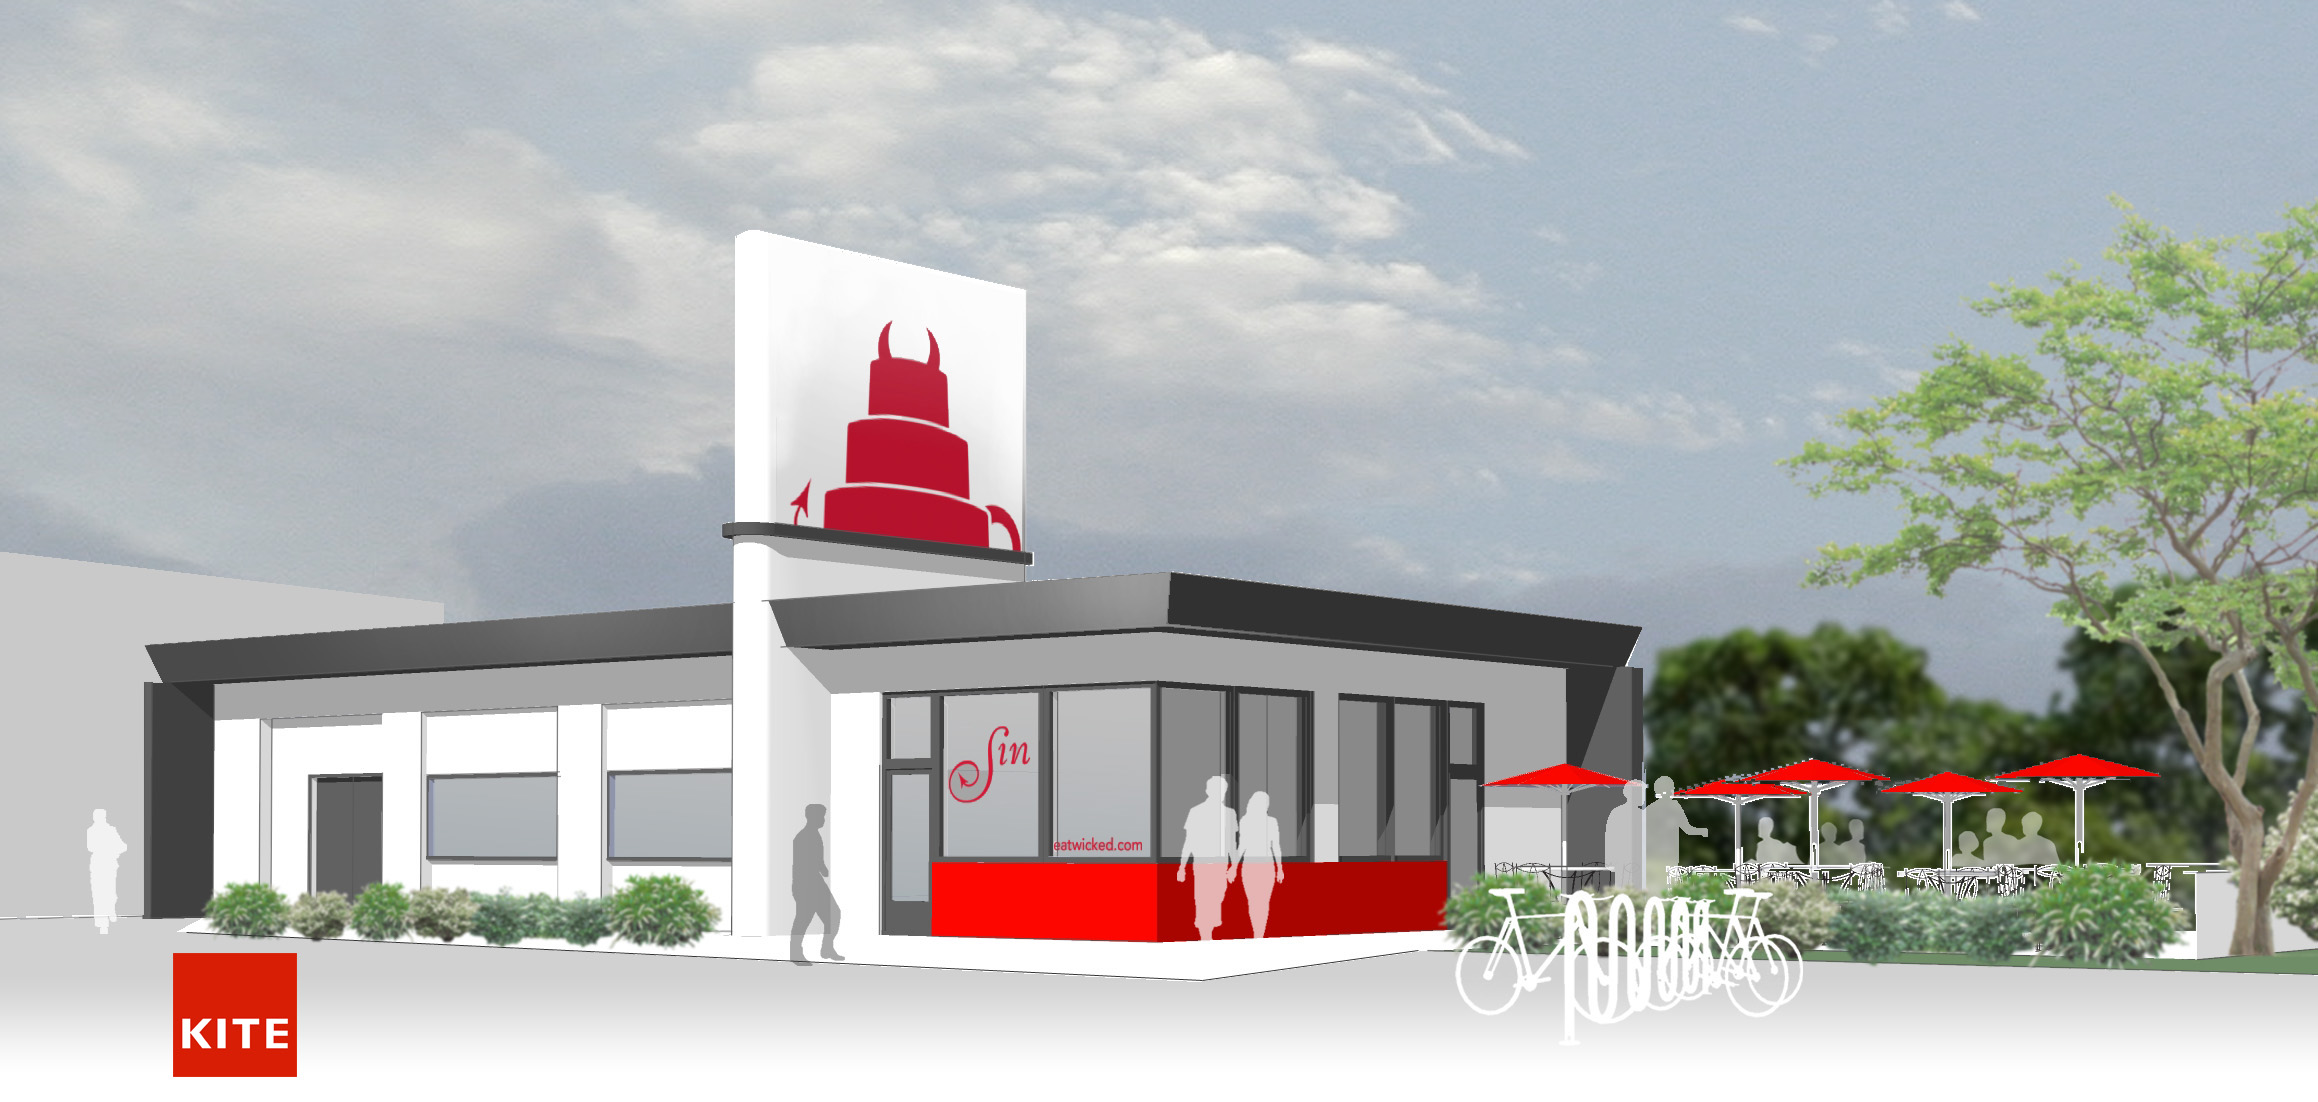  2013 rendering of proposed location for Sin Bakery by design winner Christine West, KITE Architects 